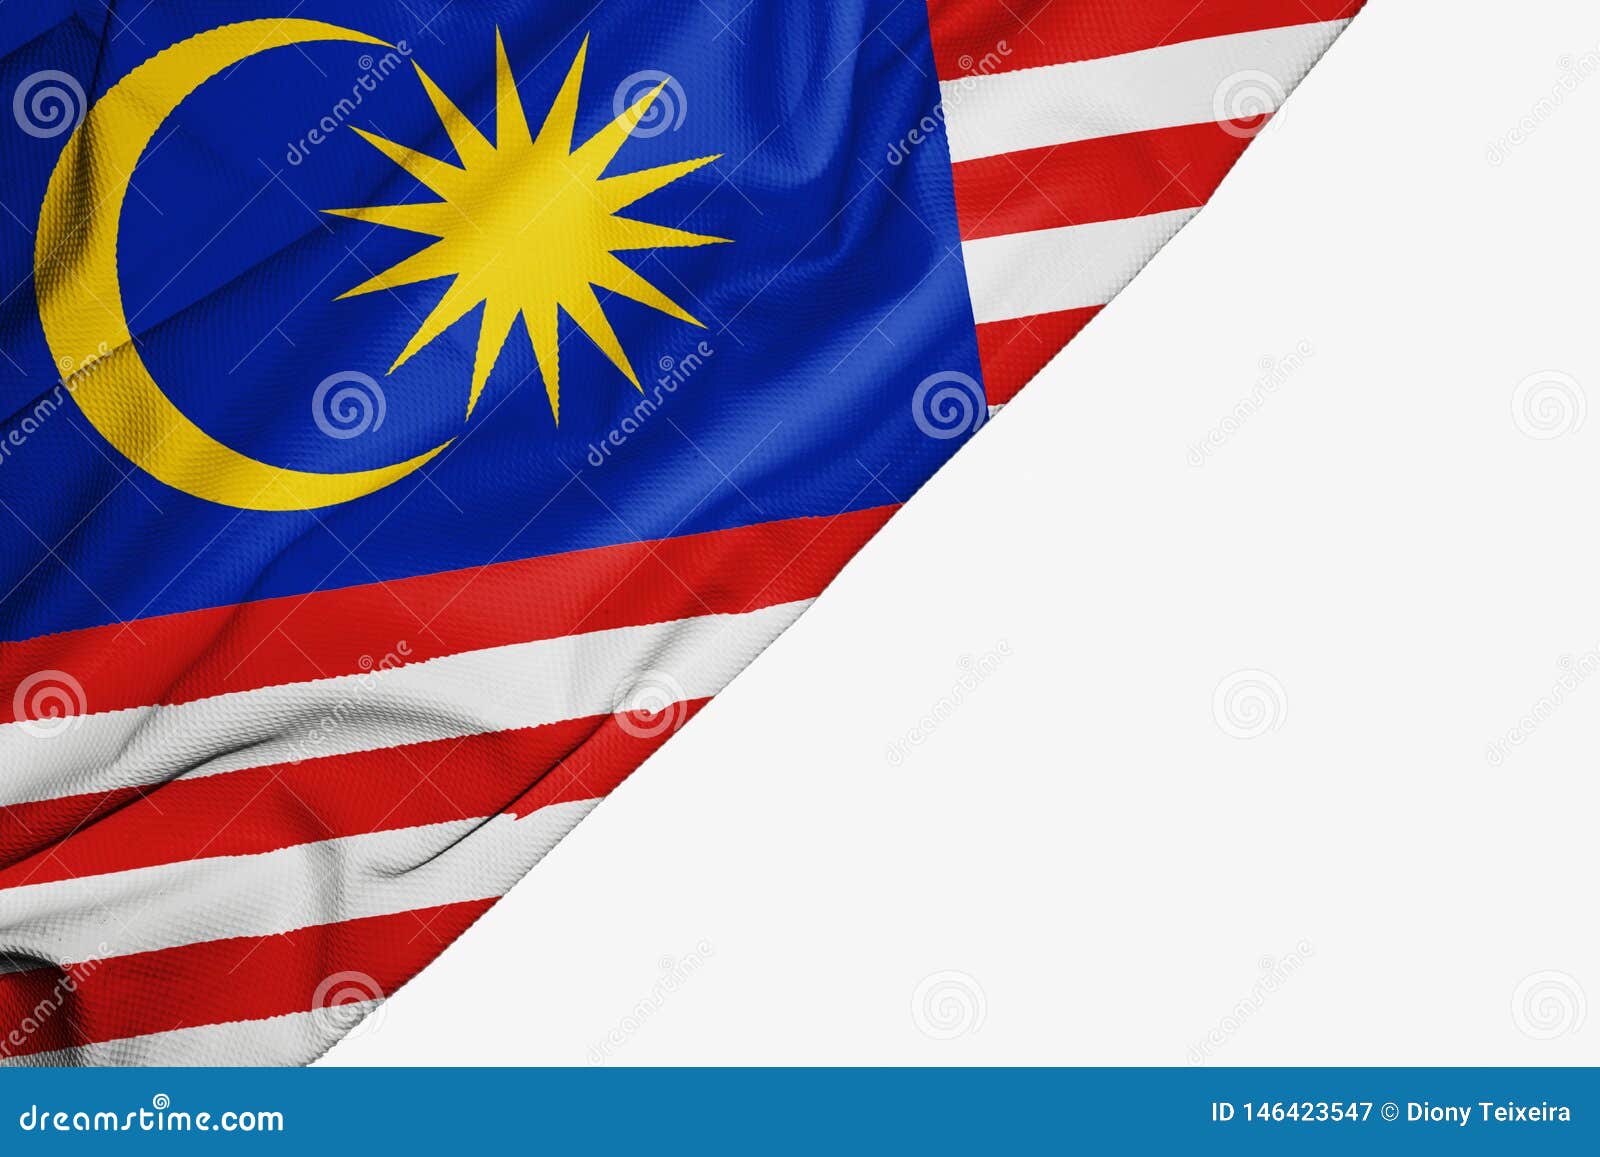 malasia flag of fabric with copyspace for your text on white background